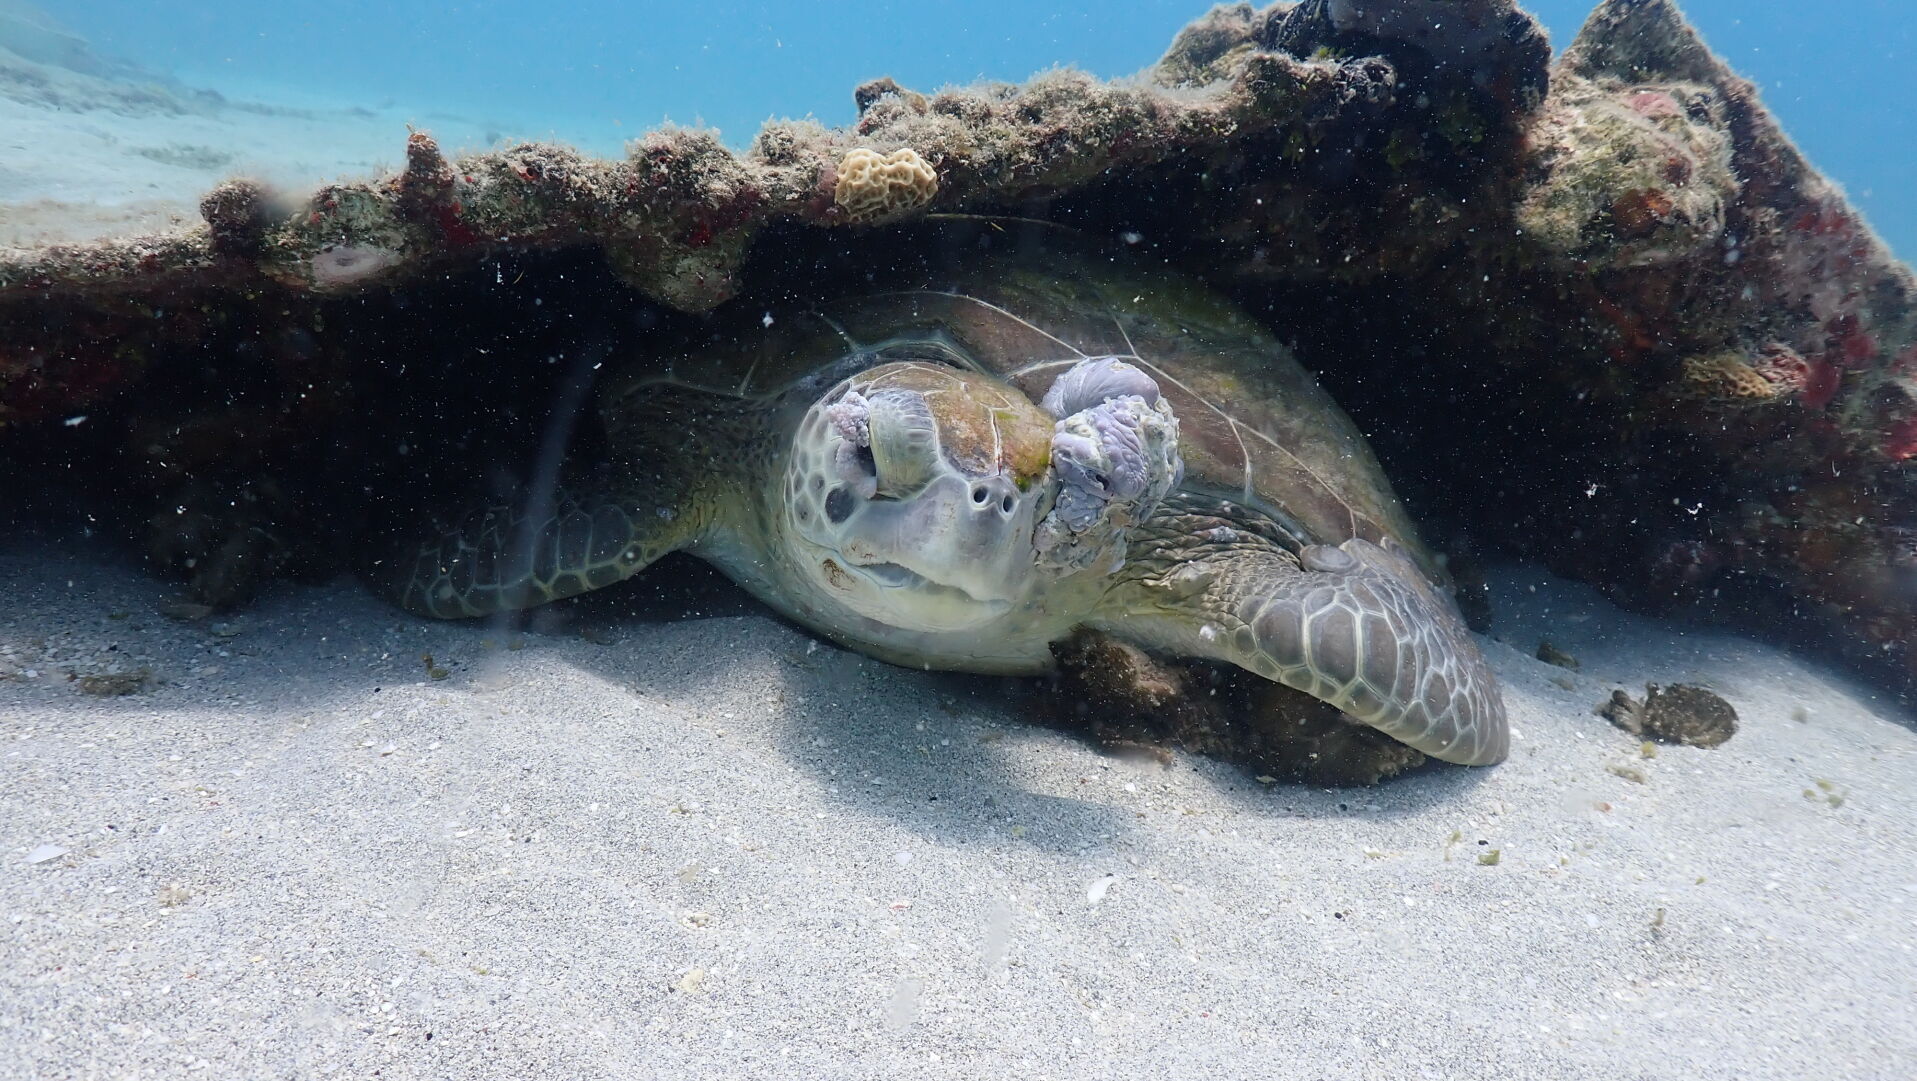 St. Croix green sea turtle's condition causes some alarm | News